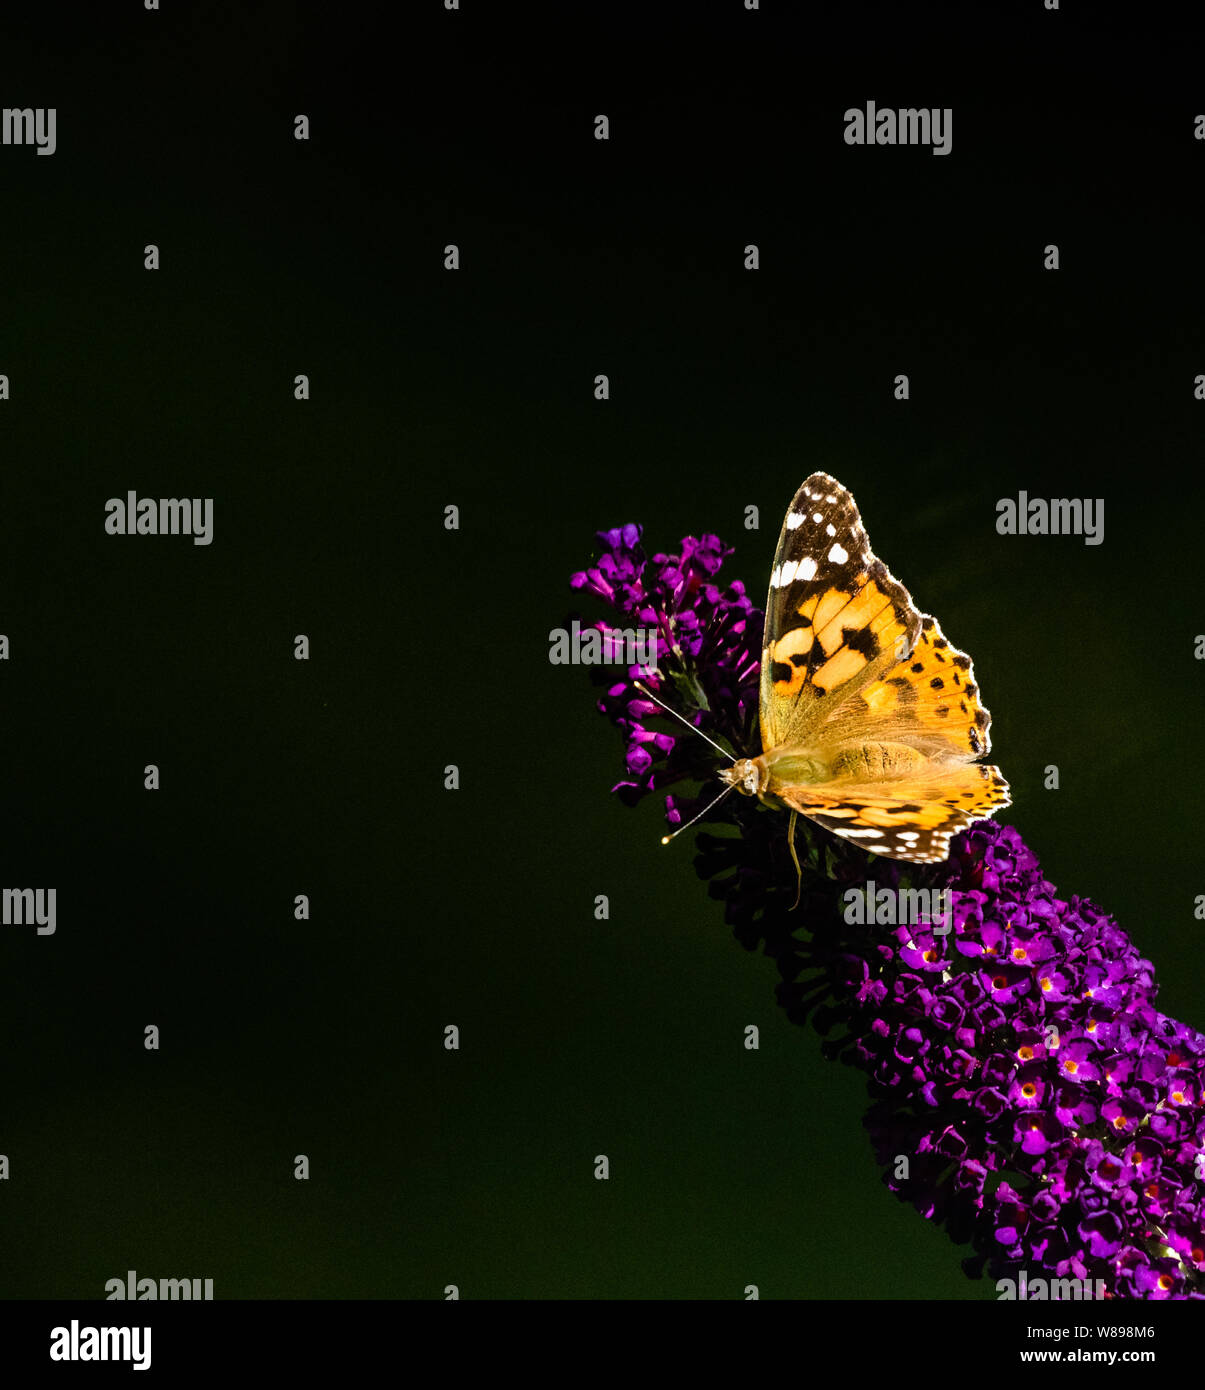 A painted lady butterfly with outstretched wings drinking nectar on a buddlea flower. Stock Photo